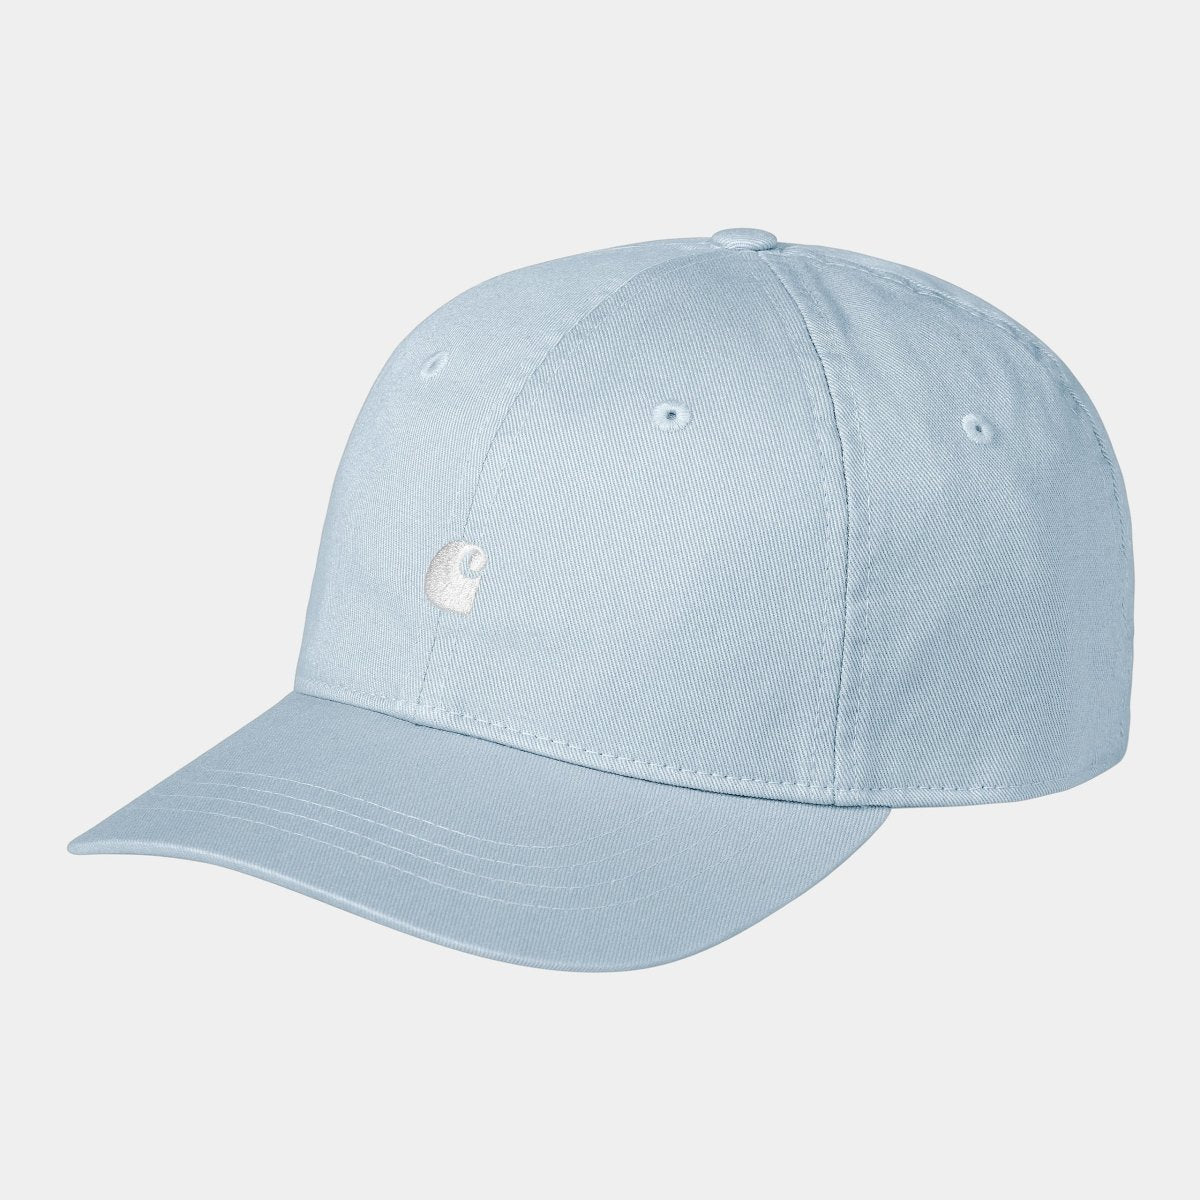 Carhartt WIP Madison Logo Cap Frosted Blue - KYOTO - Carhartt WIP